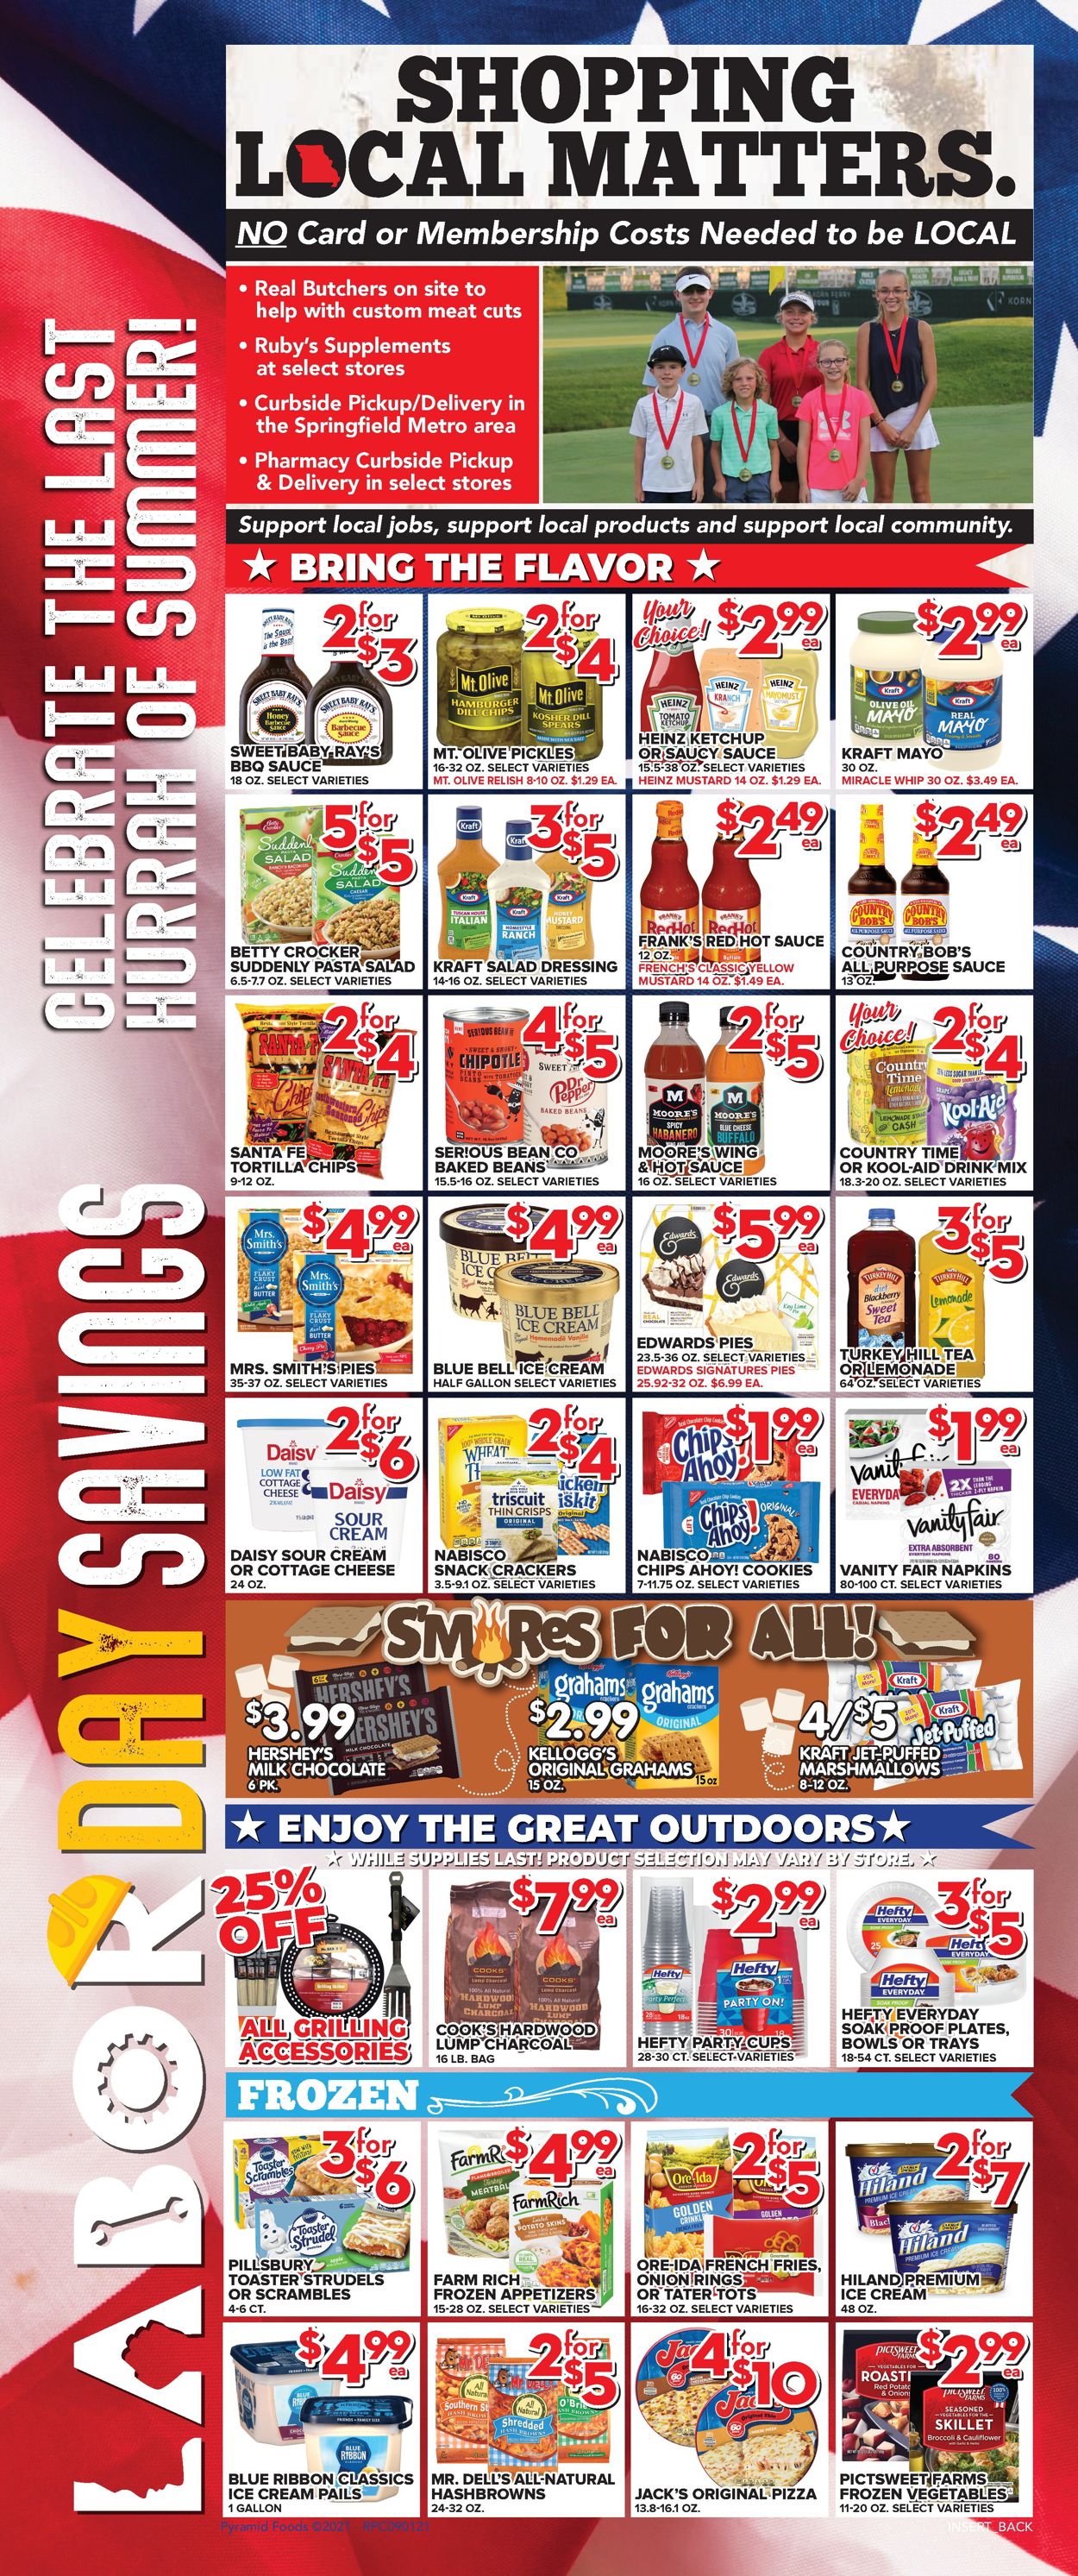 Price Cutter Weekly Ad Circular - valid 09/01-09/07/2021 (Page 6)